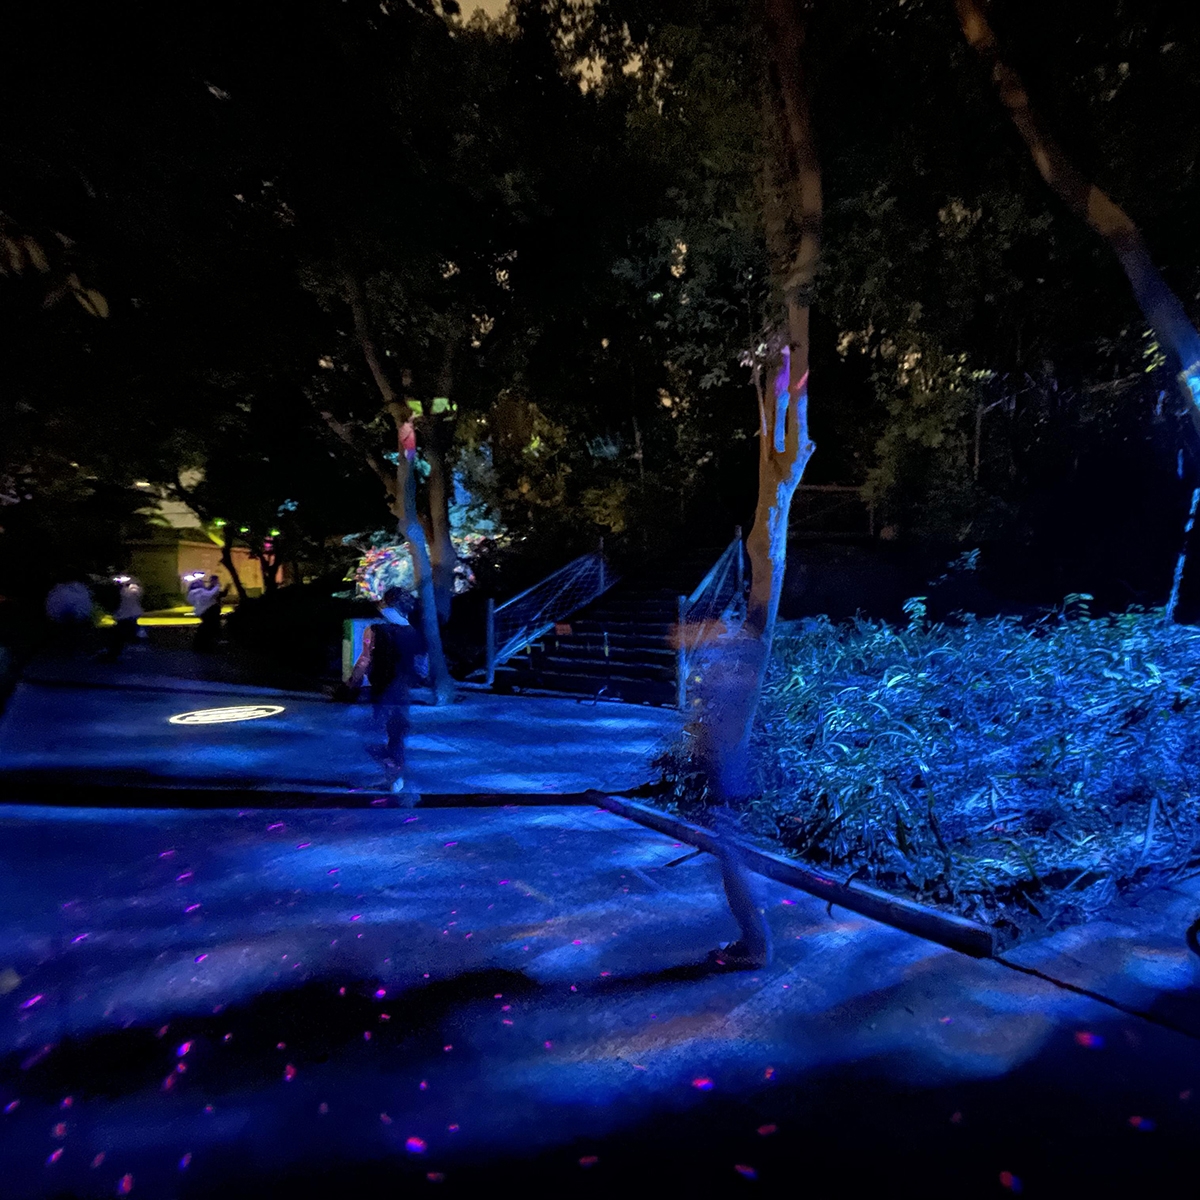 A scenic spot illuminated with a water wave projector